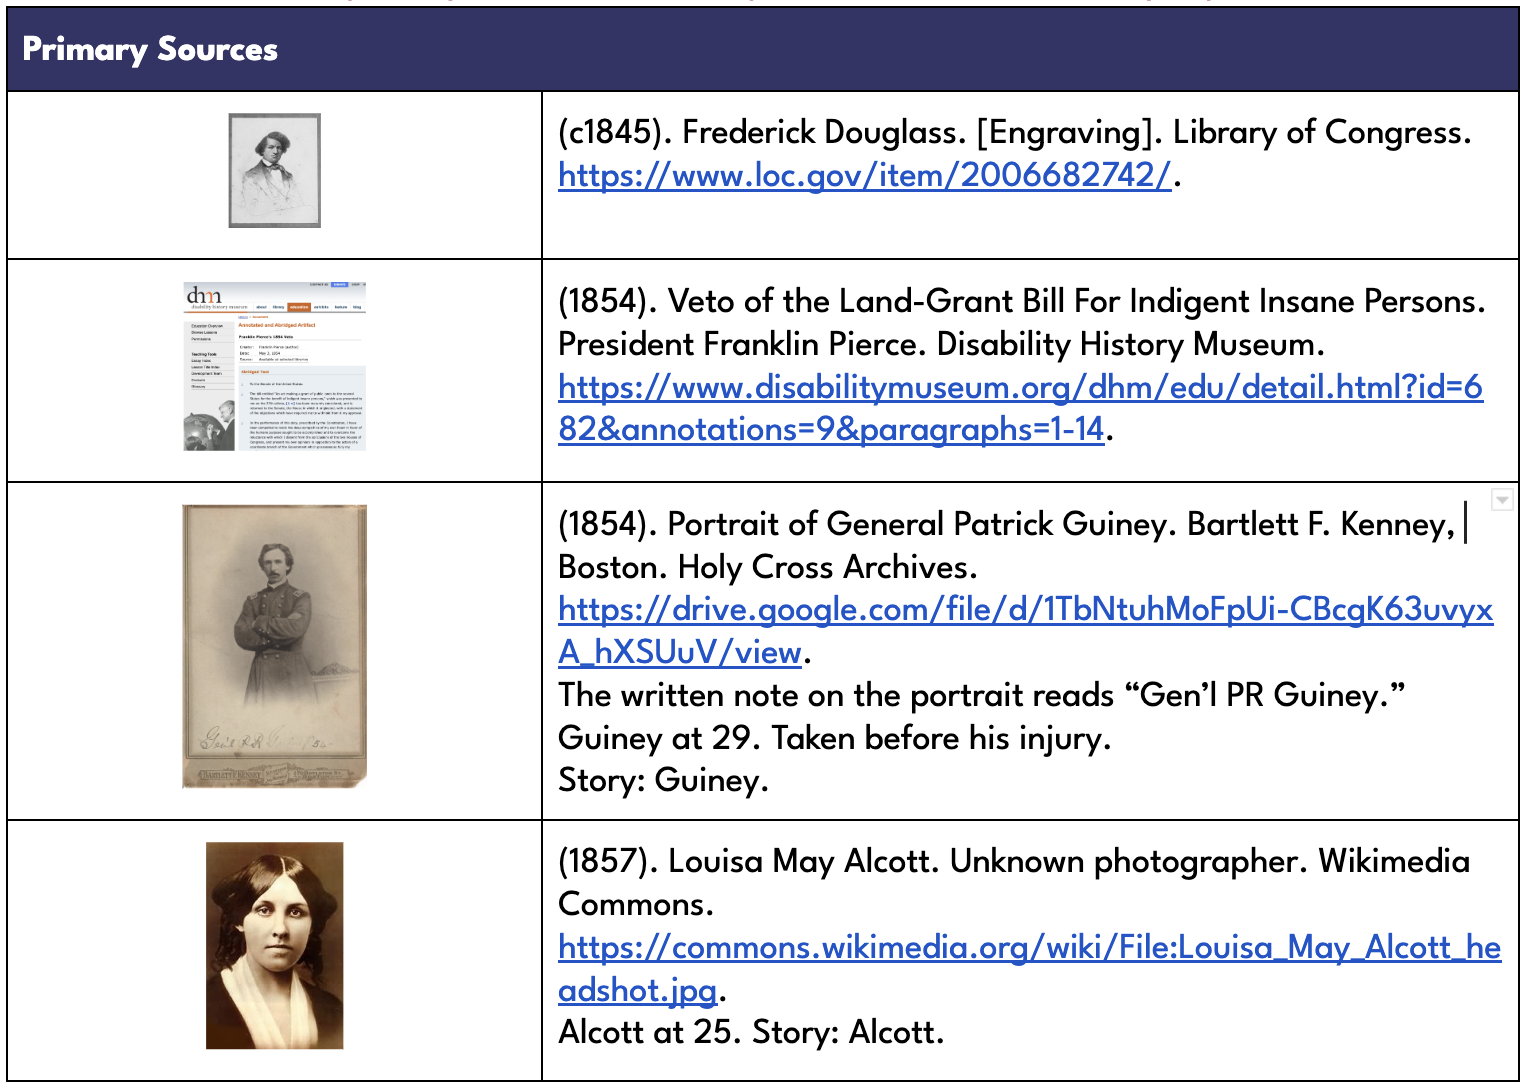 Screen cap of the first four items in the list of primary sources from the exhibit.